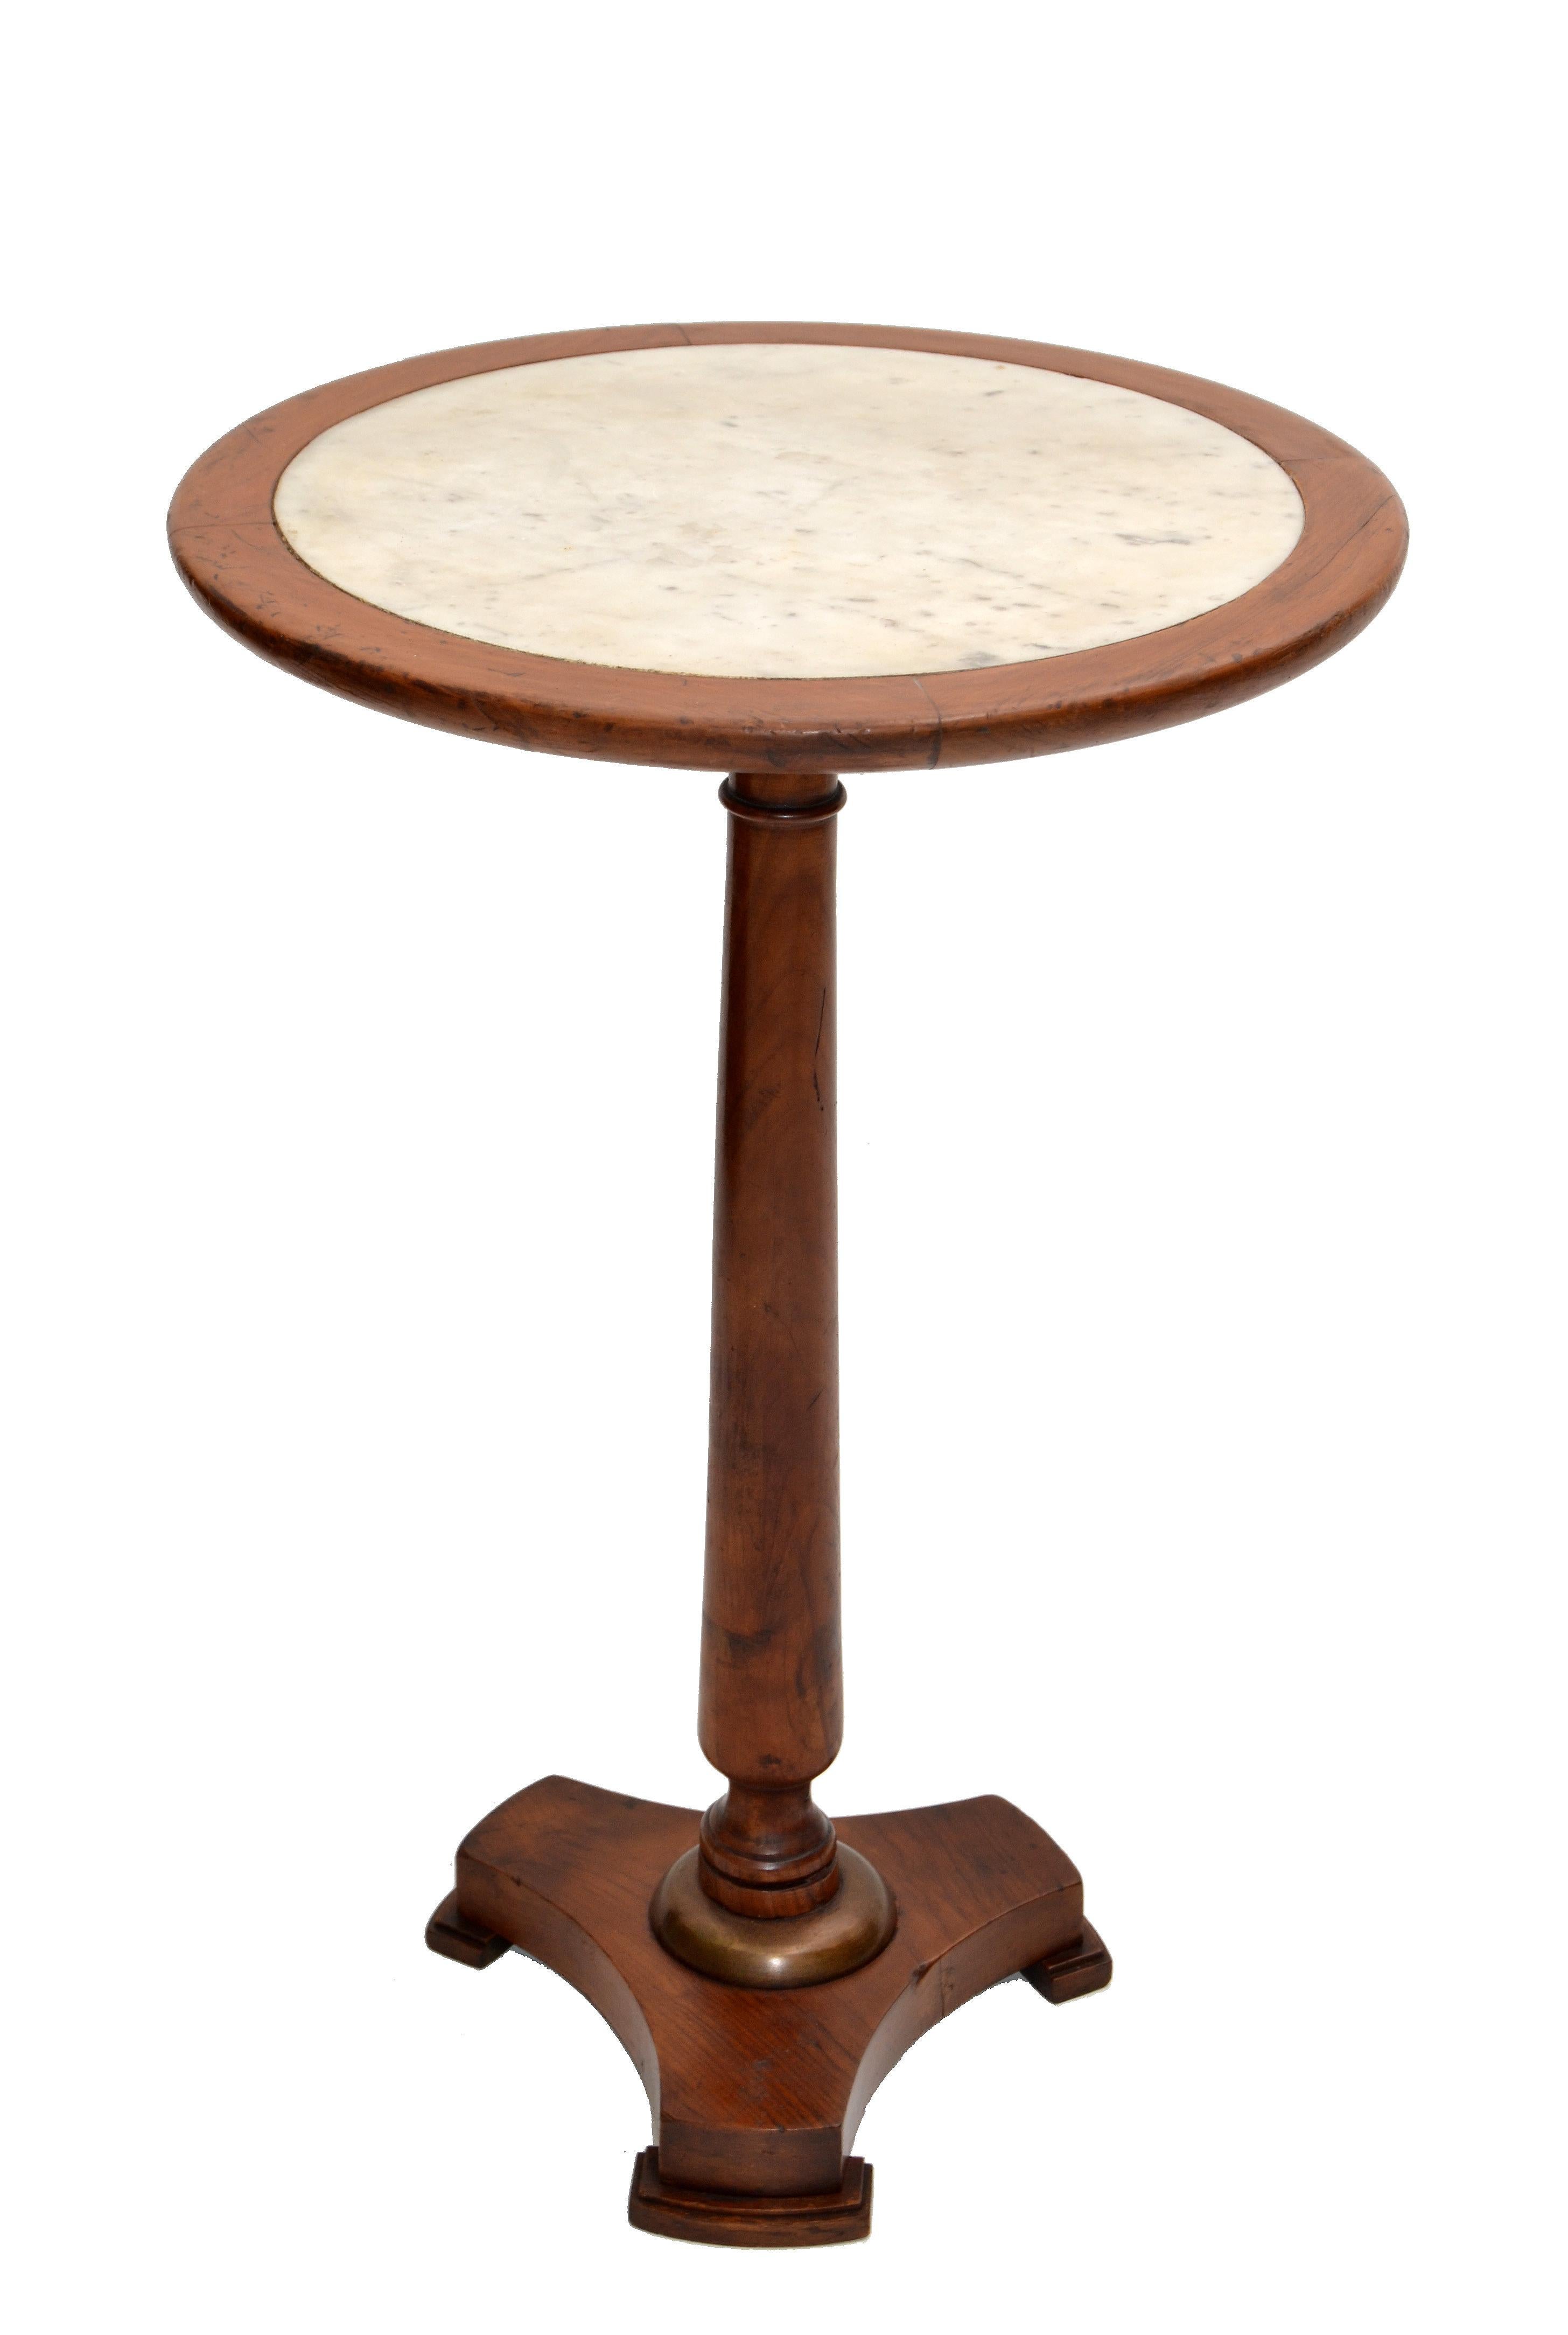 We offer an Empire style side table made in France.
Turned oak wood pedestal stand with Marble Top from the late 1950s.
Stamped underneath, Made in France.